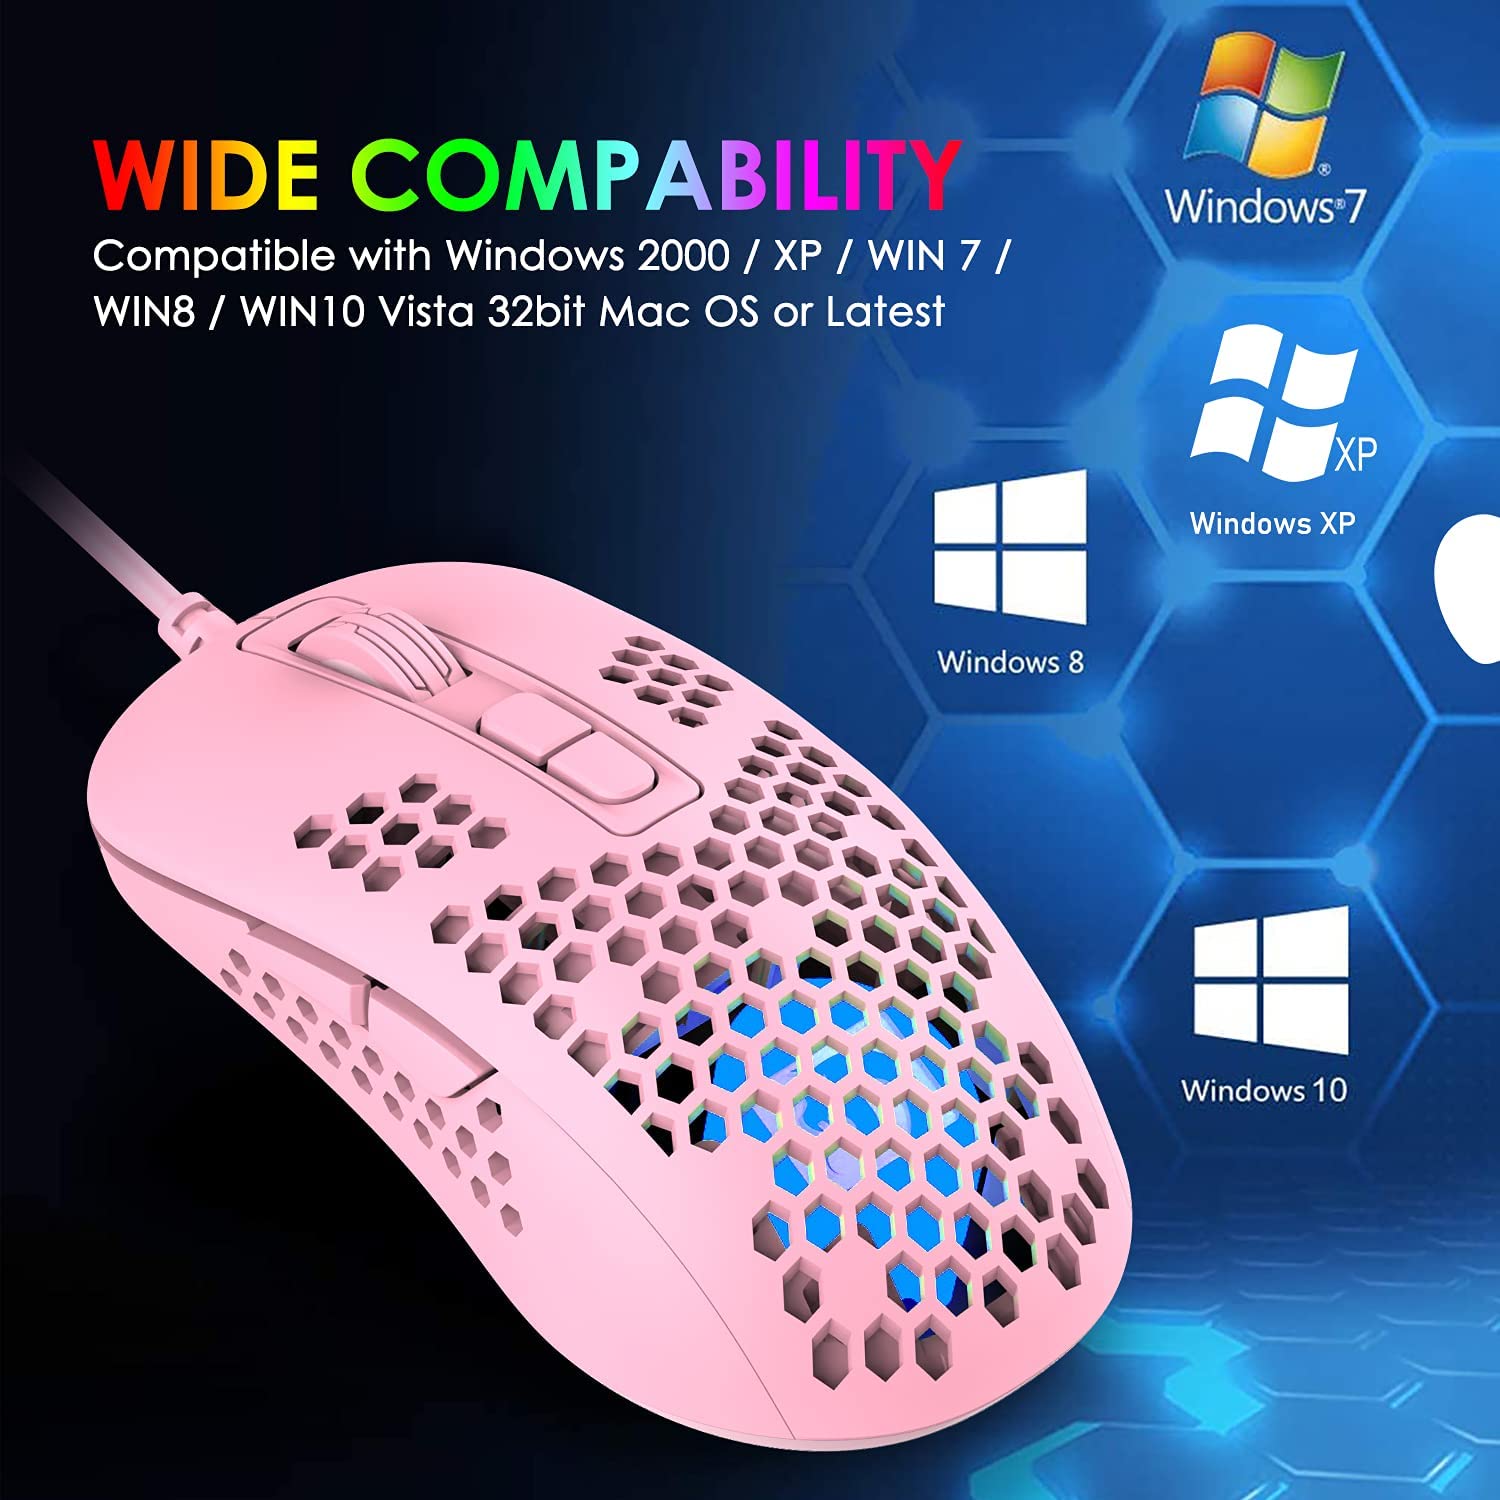 MAMBASNAKE 383 Lightweight Wired Mouse, USB Optical Computer Mice with